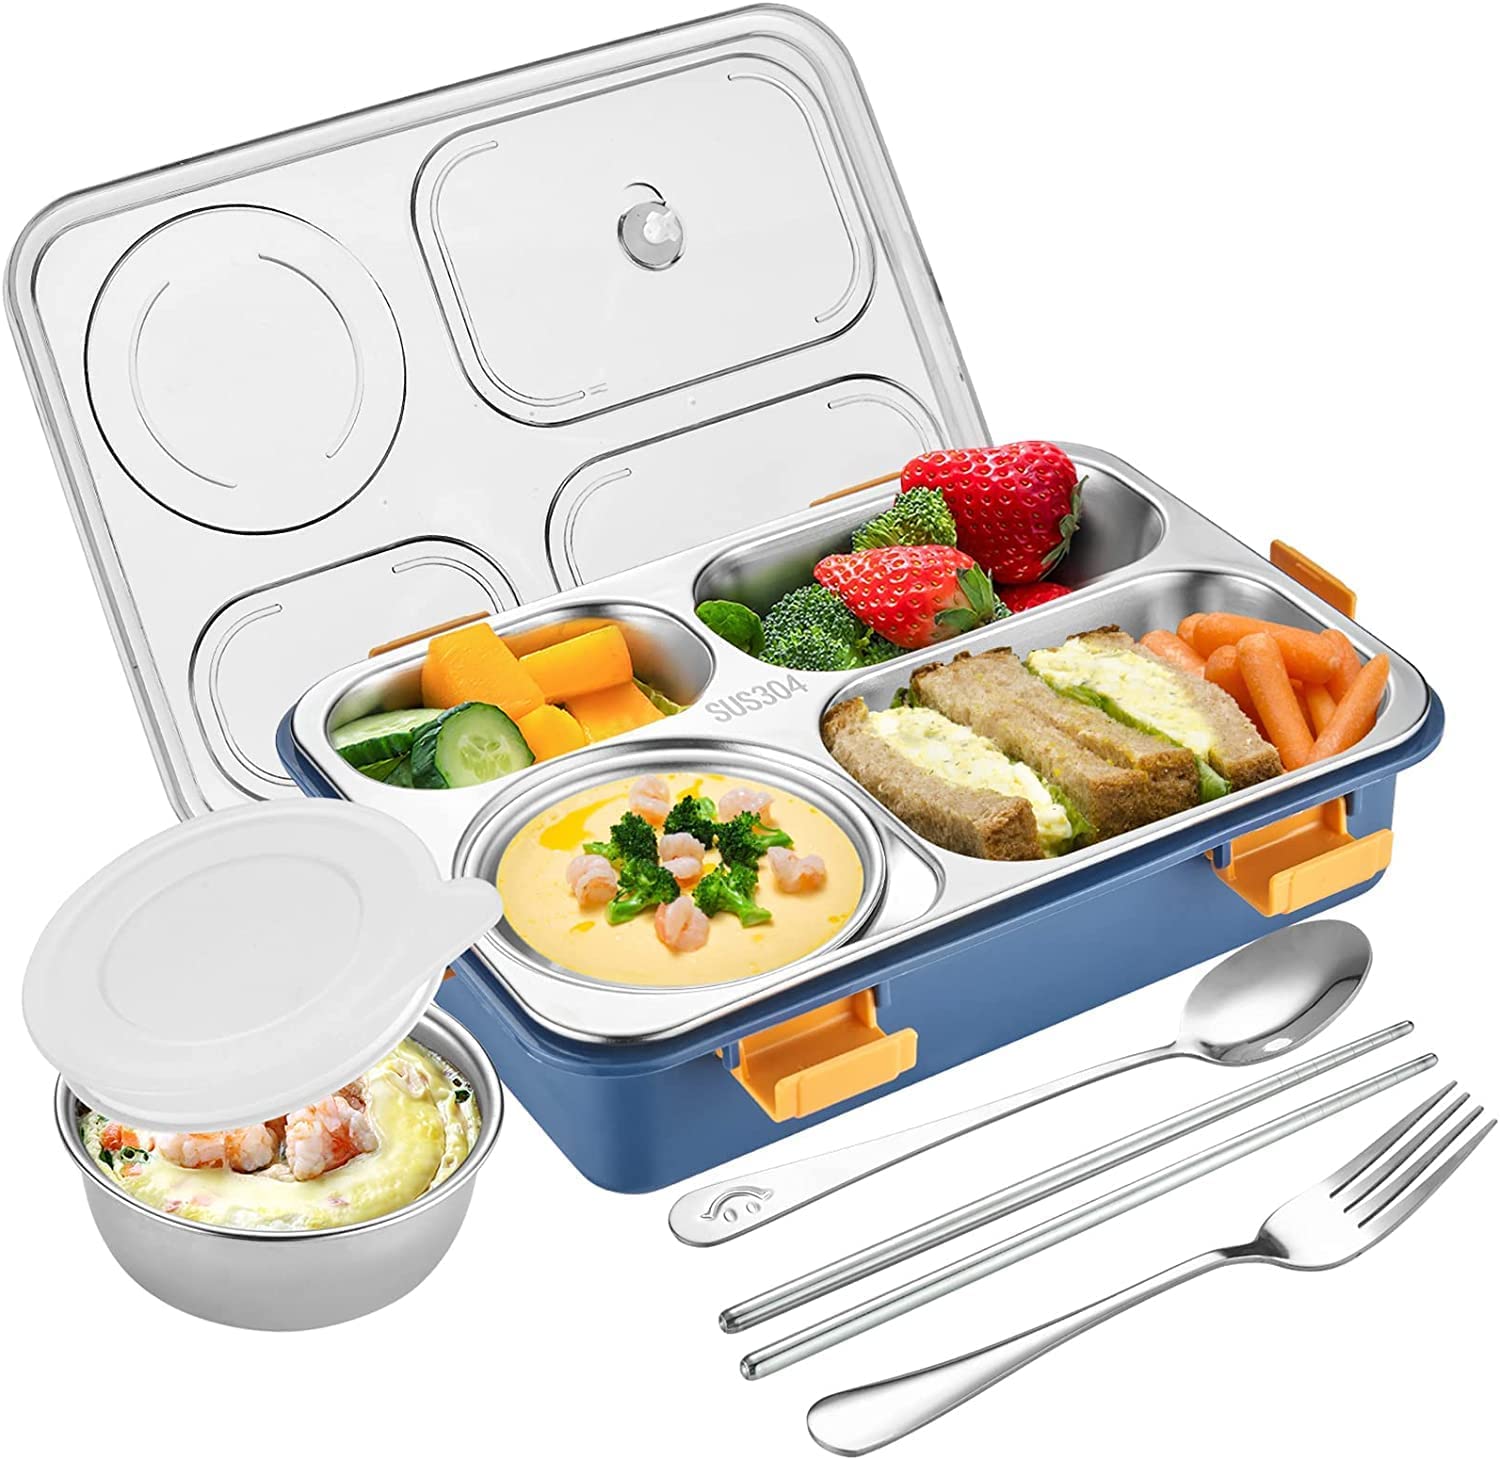 Lunch Boxes for Adults - Lunch Box for Kids with Spoon & Fork - Durable Perfect Size for On-The-Go Meal, BPA-Free (Multi Color) (3 Section)